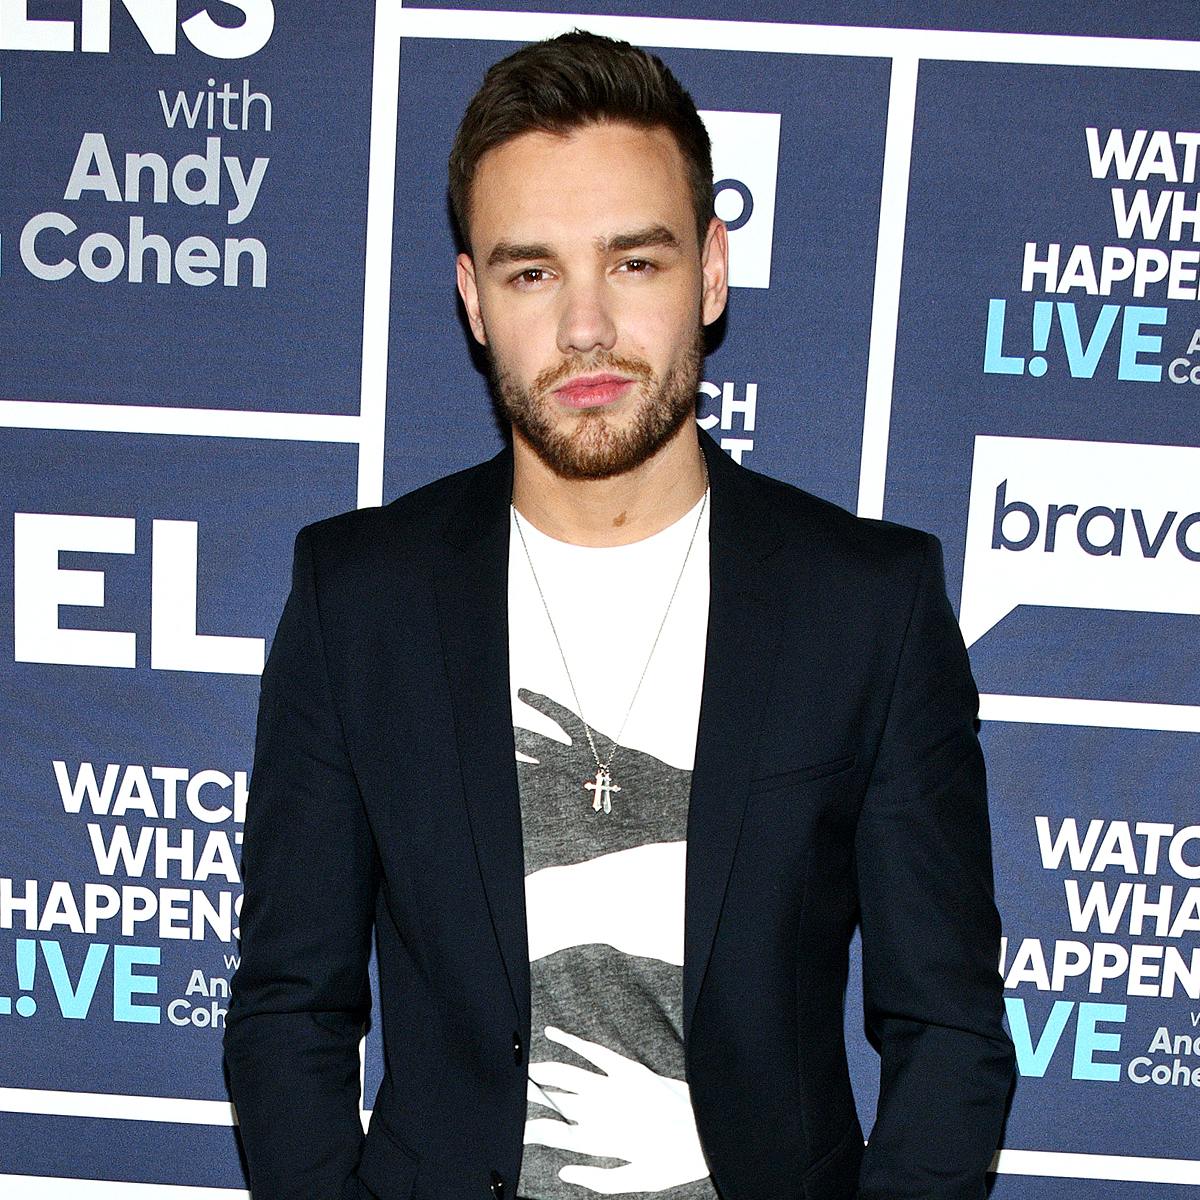 liam payne quotes about life